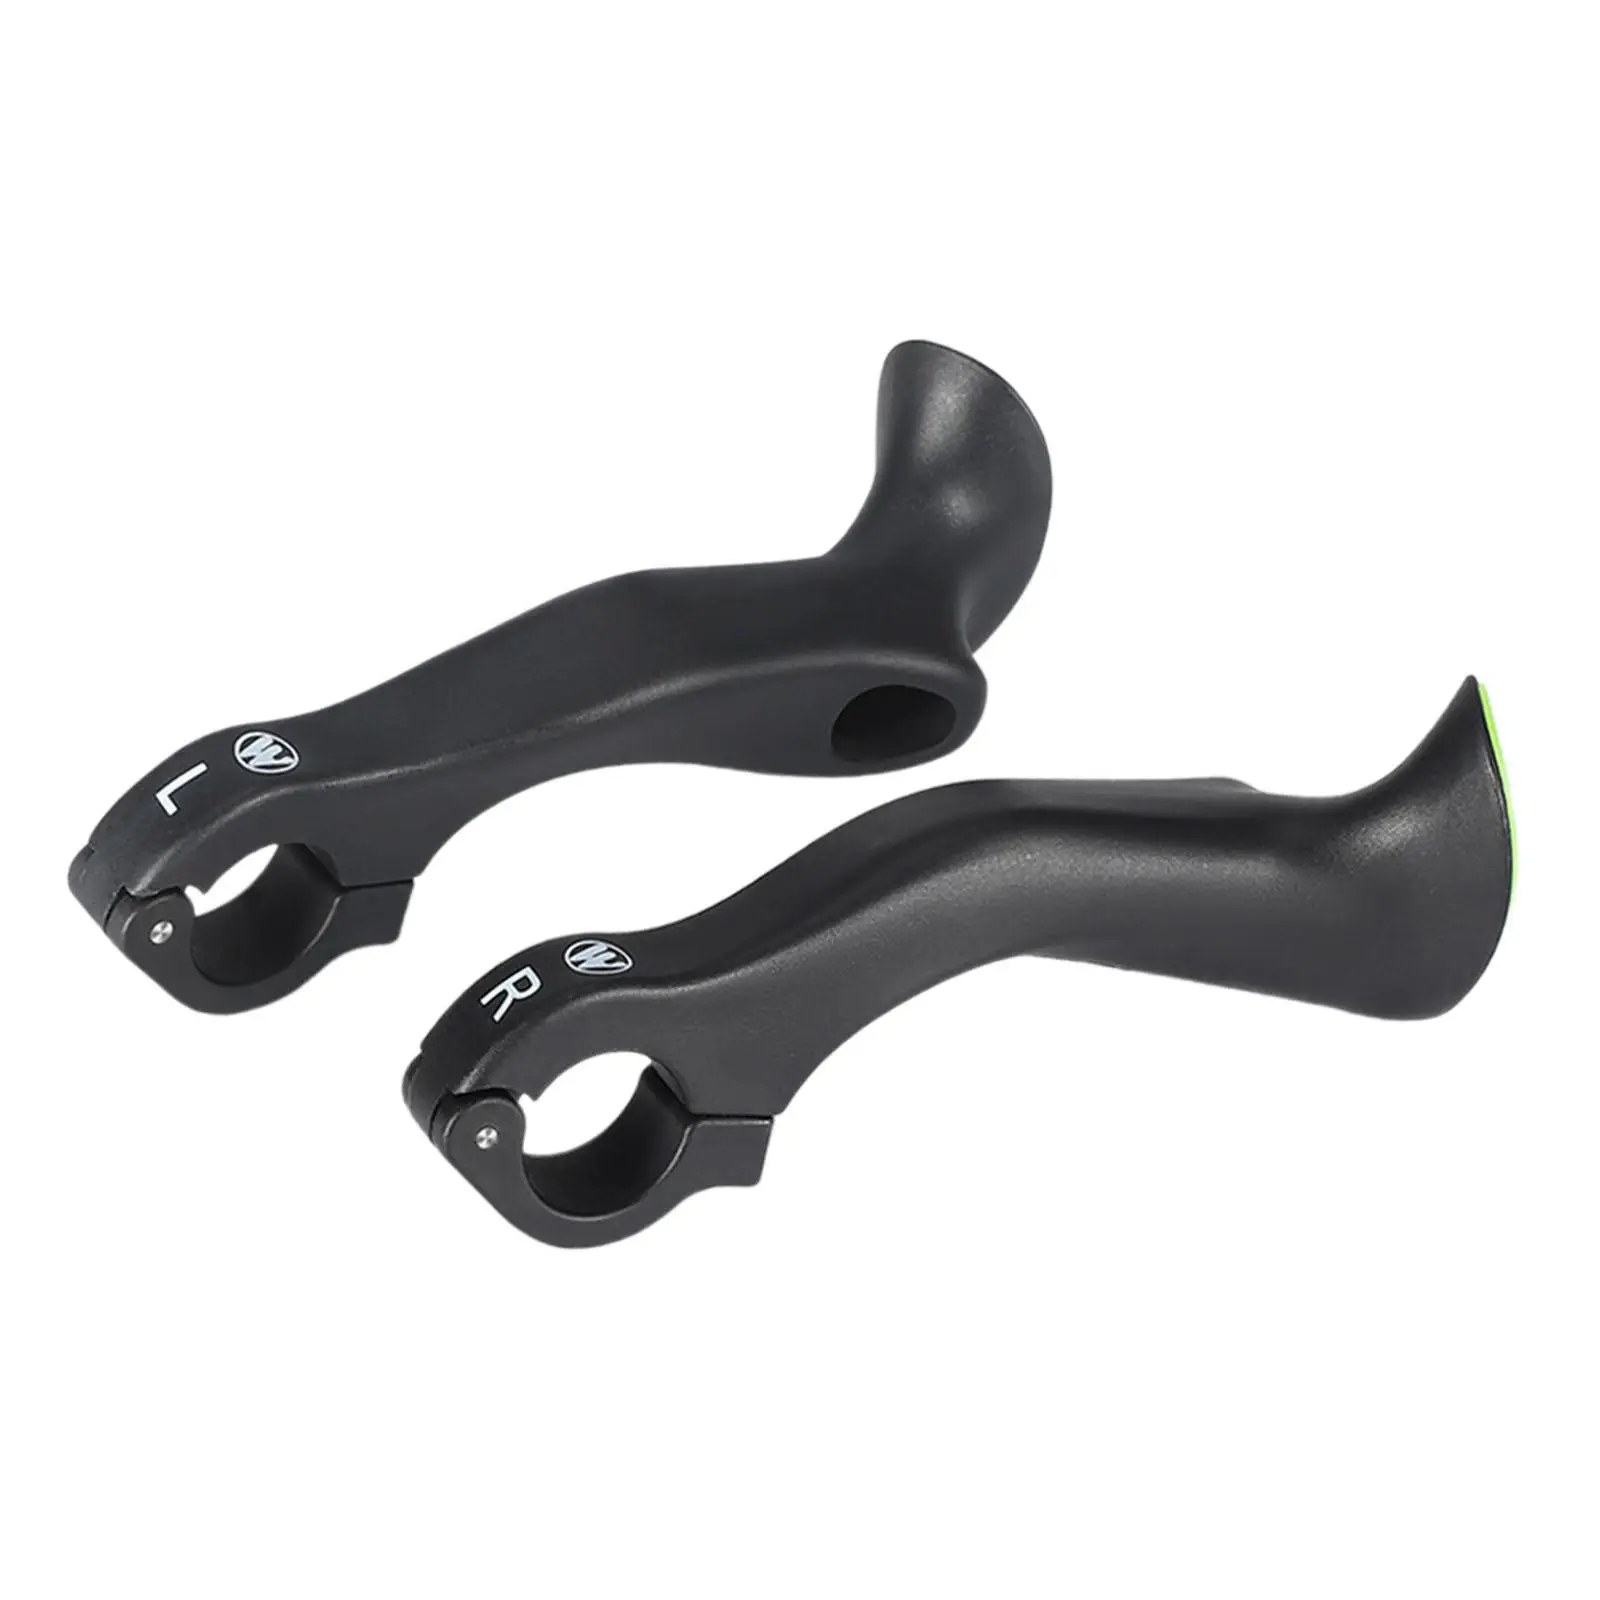 Bicycle Handlebar Ends Bike Rest Bar Ends Cycling Universal Extender Auxiliary Handle Bar Ends Replace Accessories Components